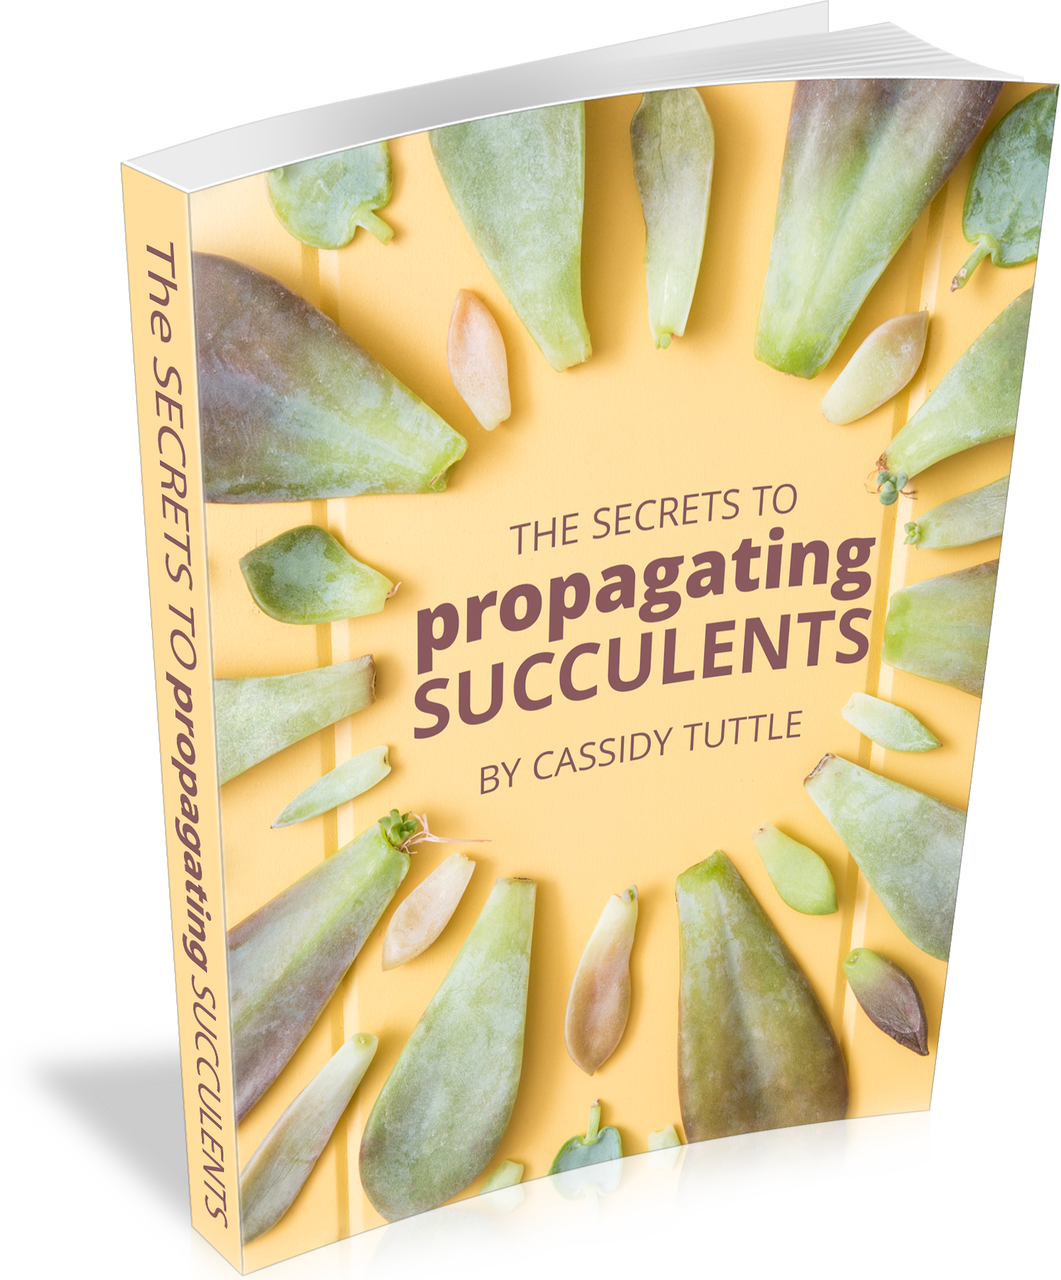 The Secrets to Propagating Succulents (E-Book) Questions & Answers